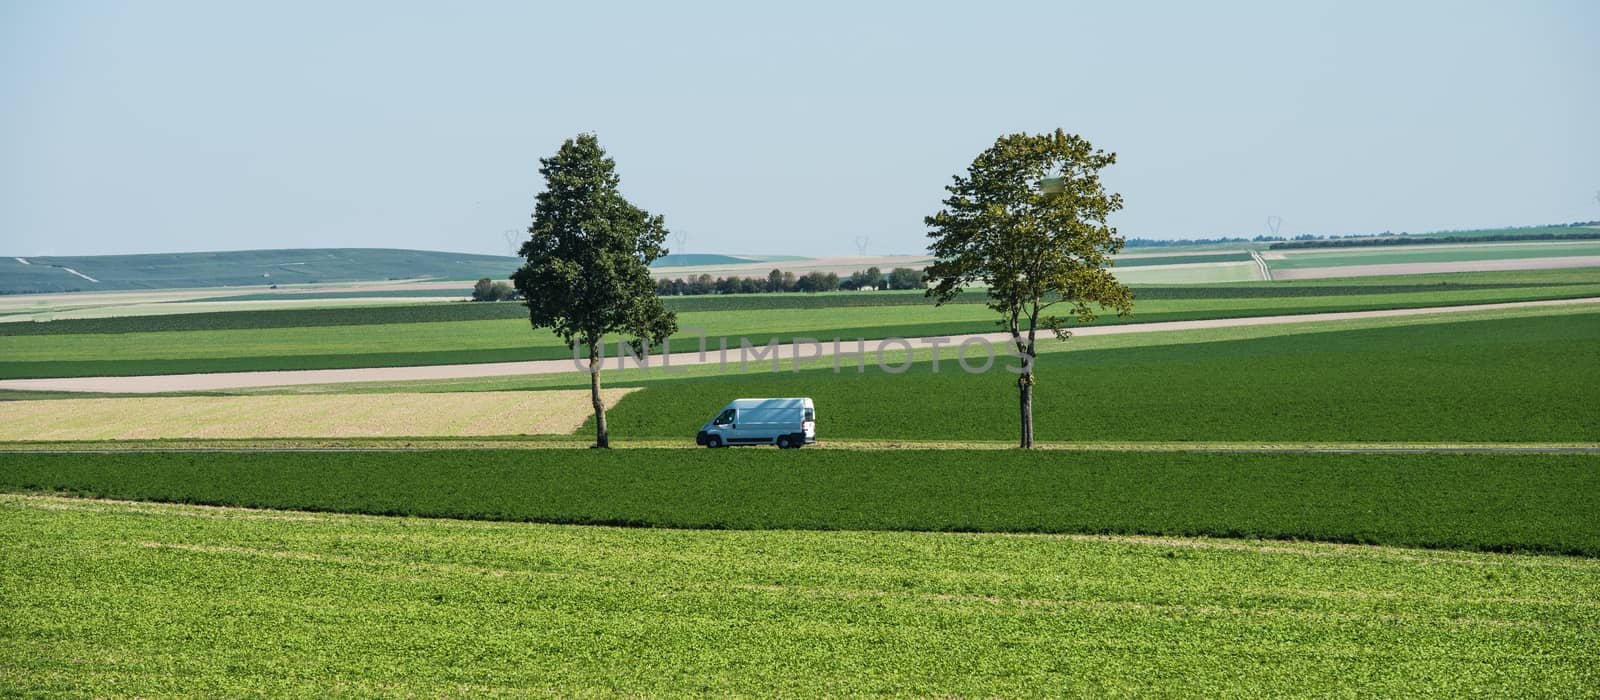 Car and Green trees in fields, blue sky, Champagne, France by FreeProd